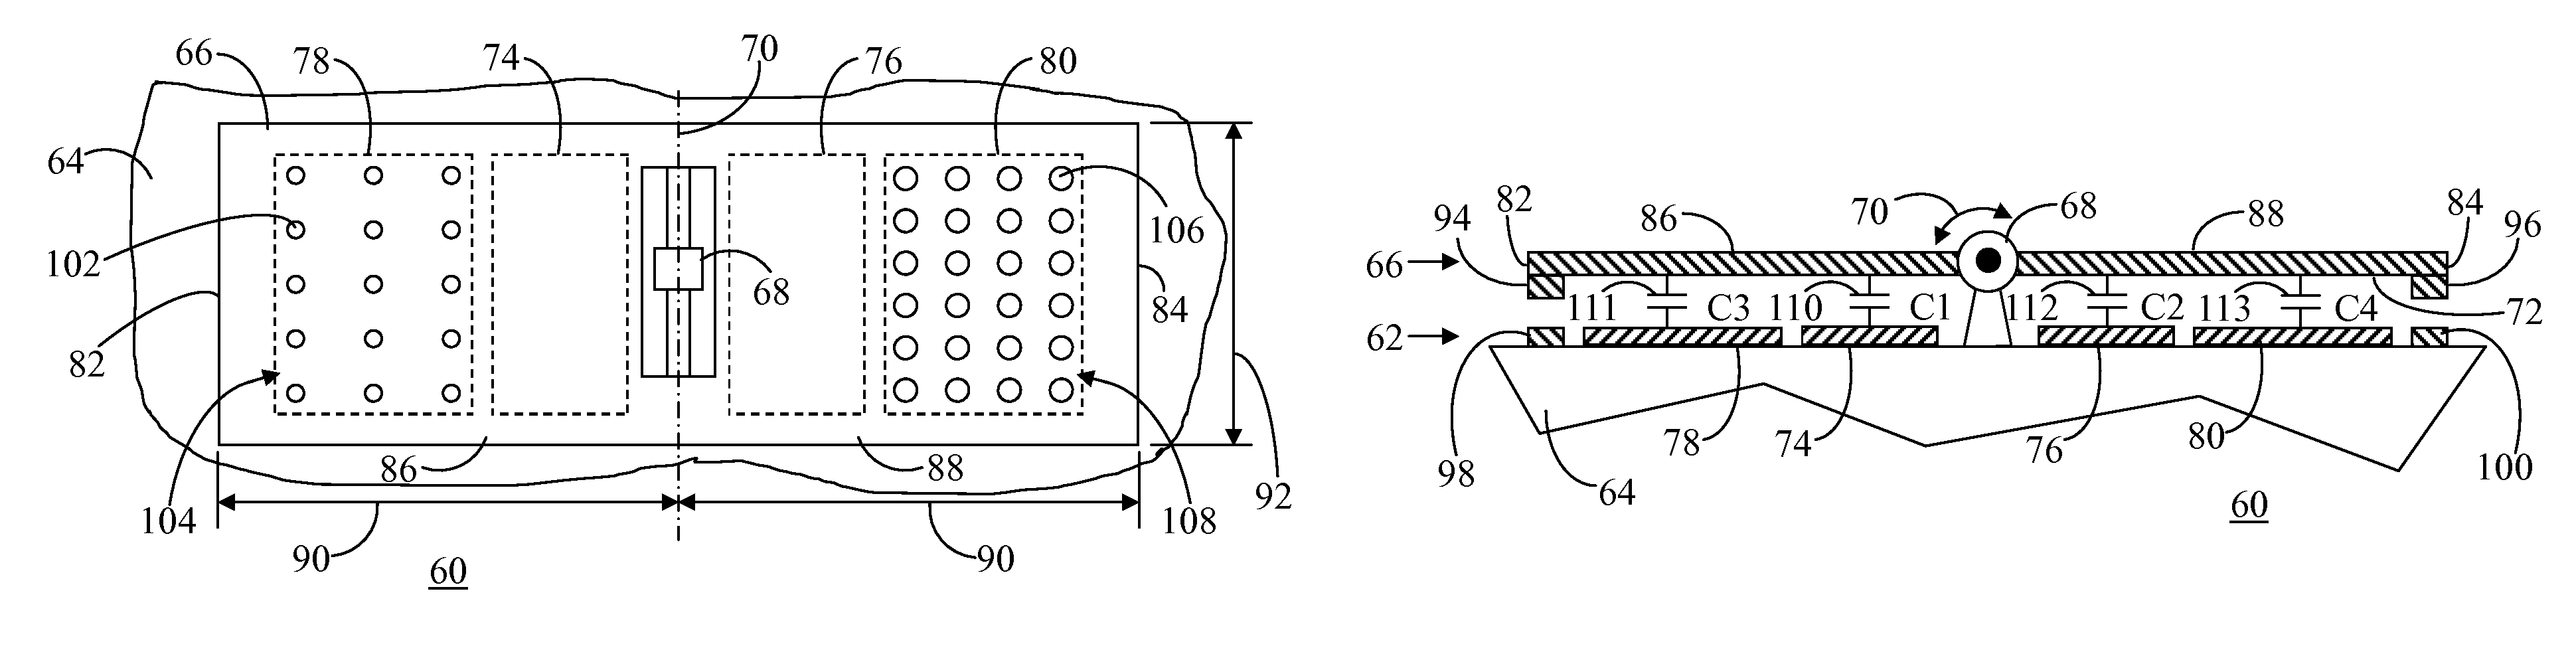 Symmetrical differential capacitive sensor and method of making same